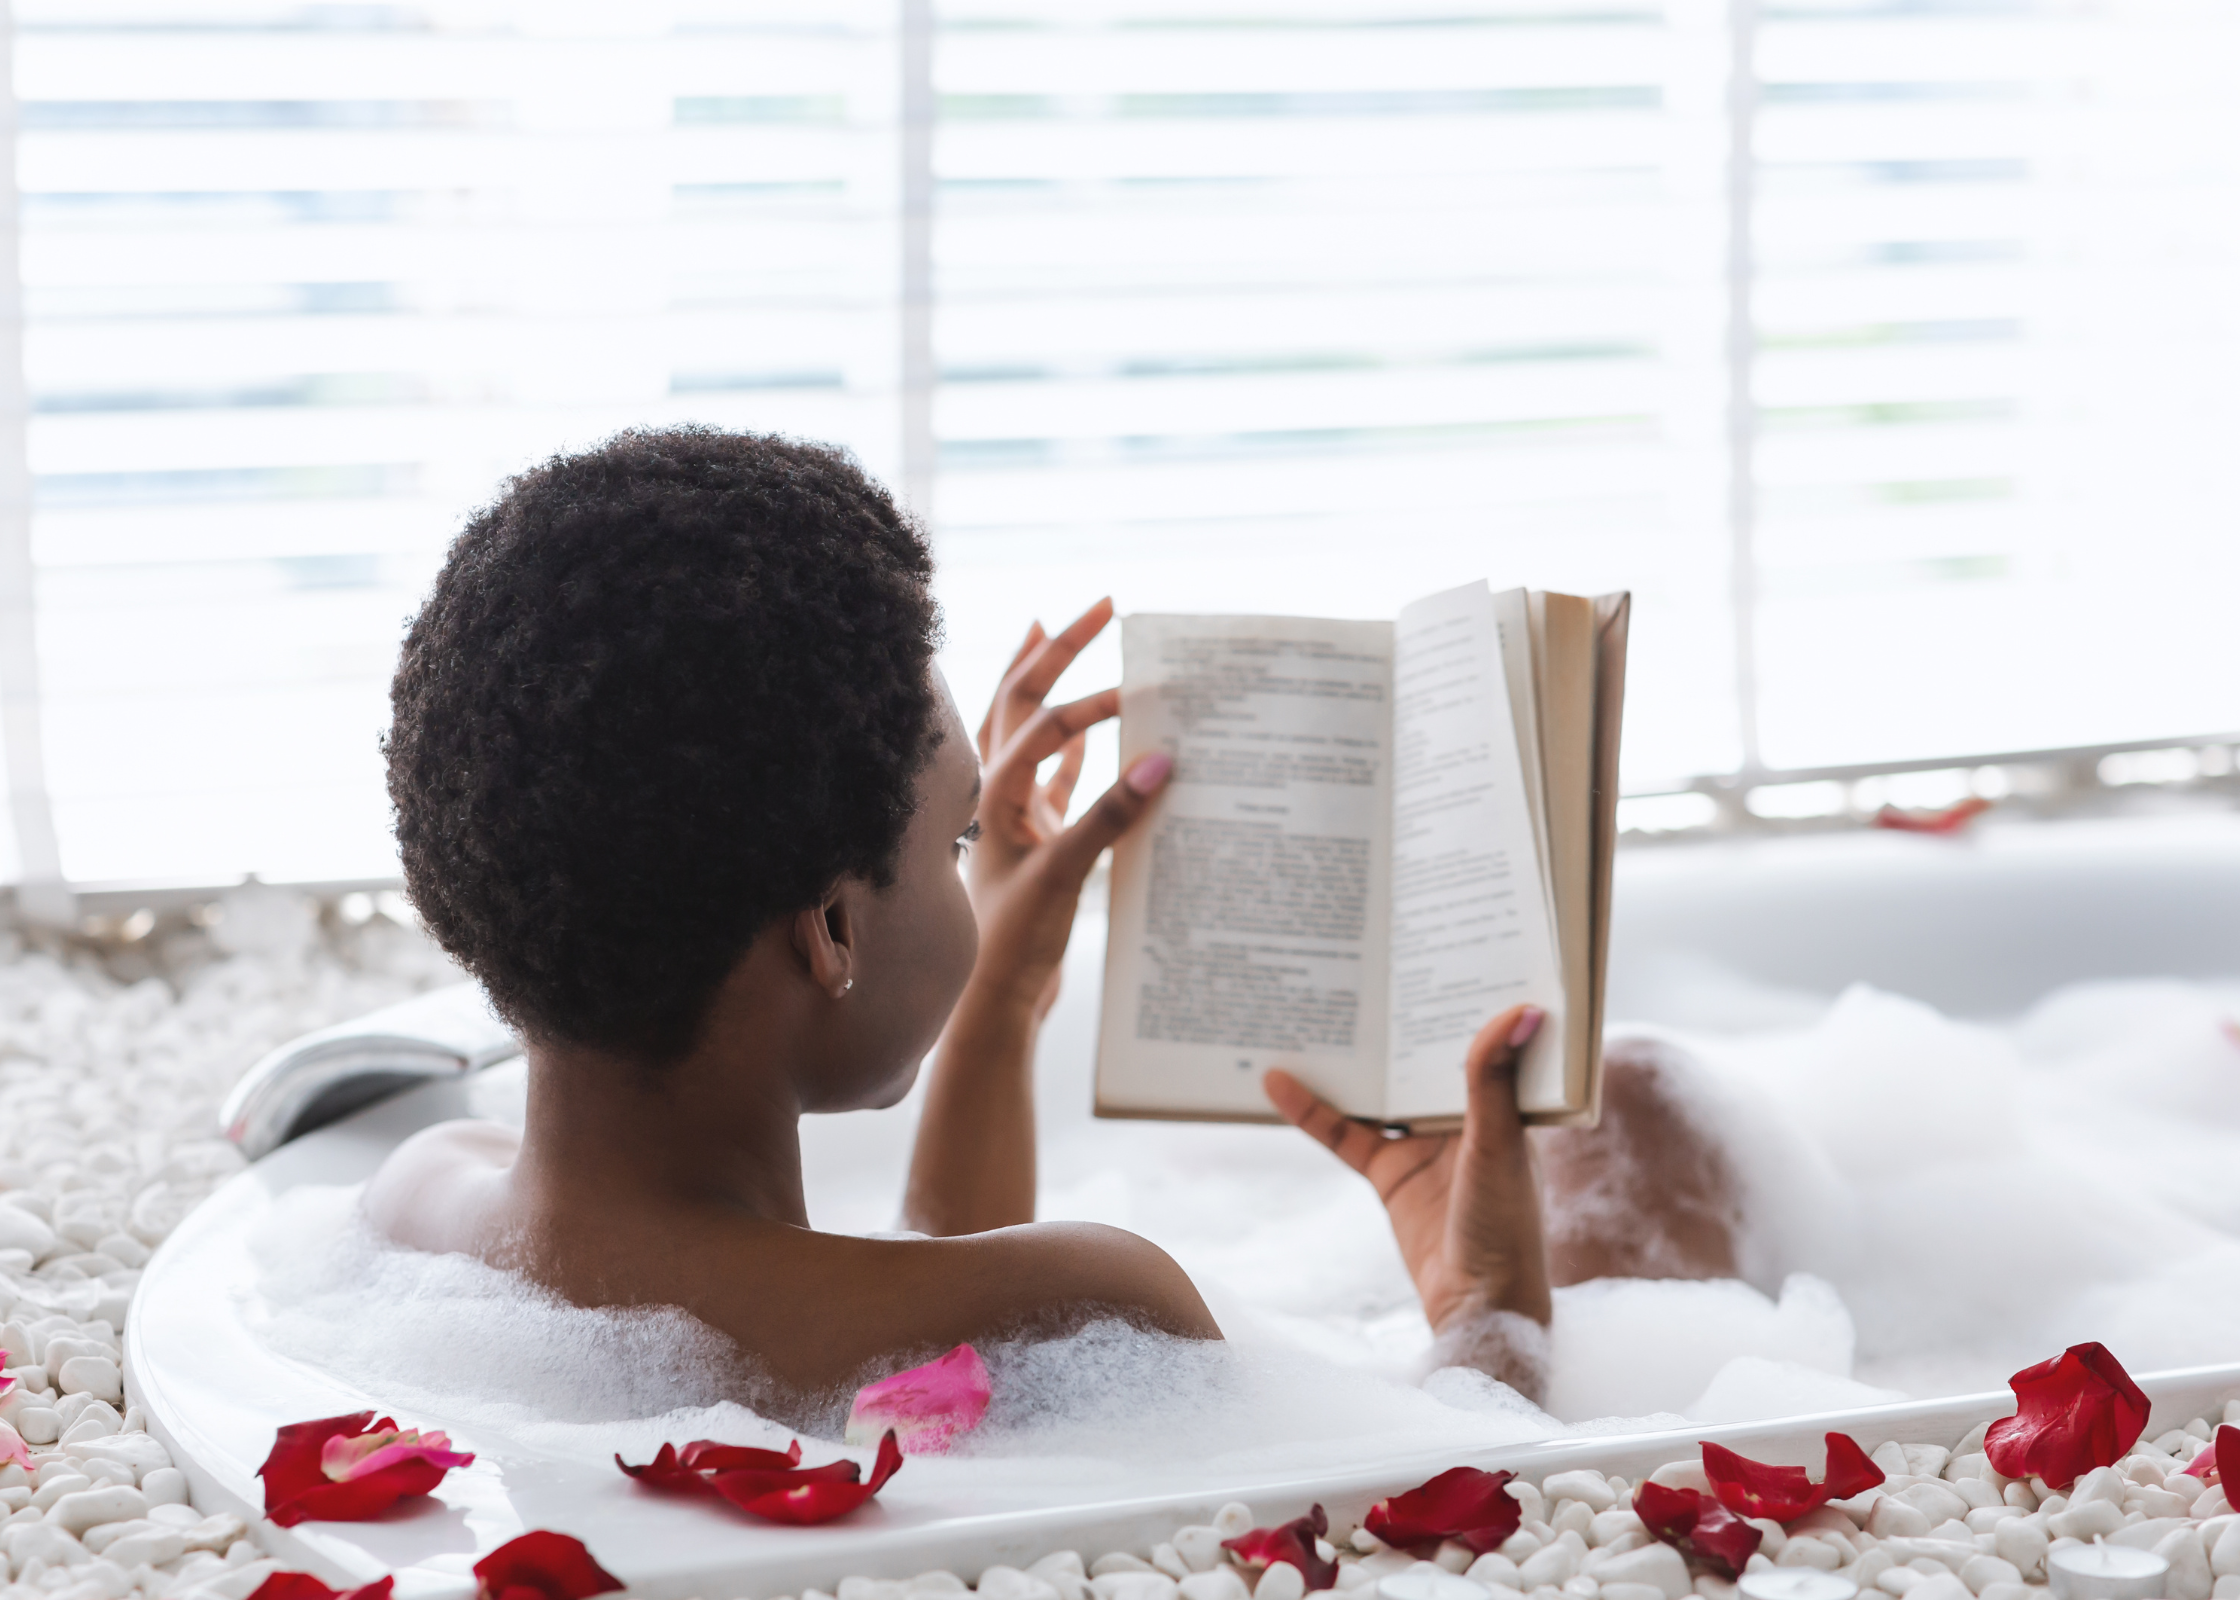 black woman reading in a bubble bath. relax after a long, hard, stressful day at work or at home. Ways to unwind and decompress after a busy day and relieve stress.